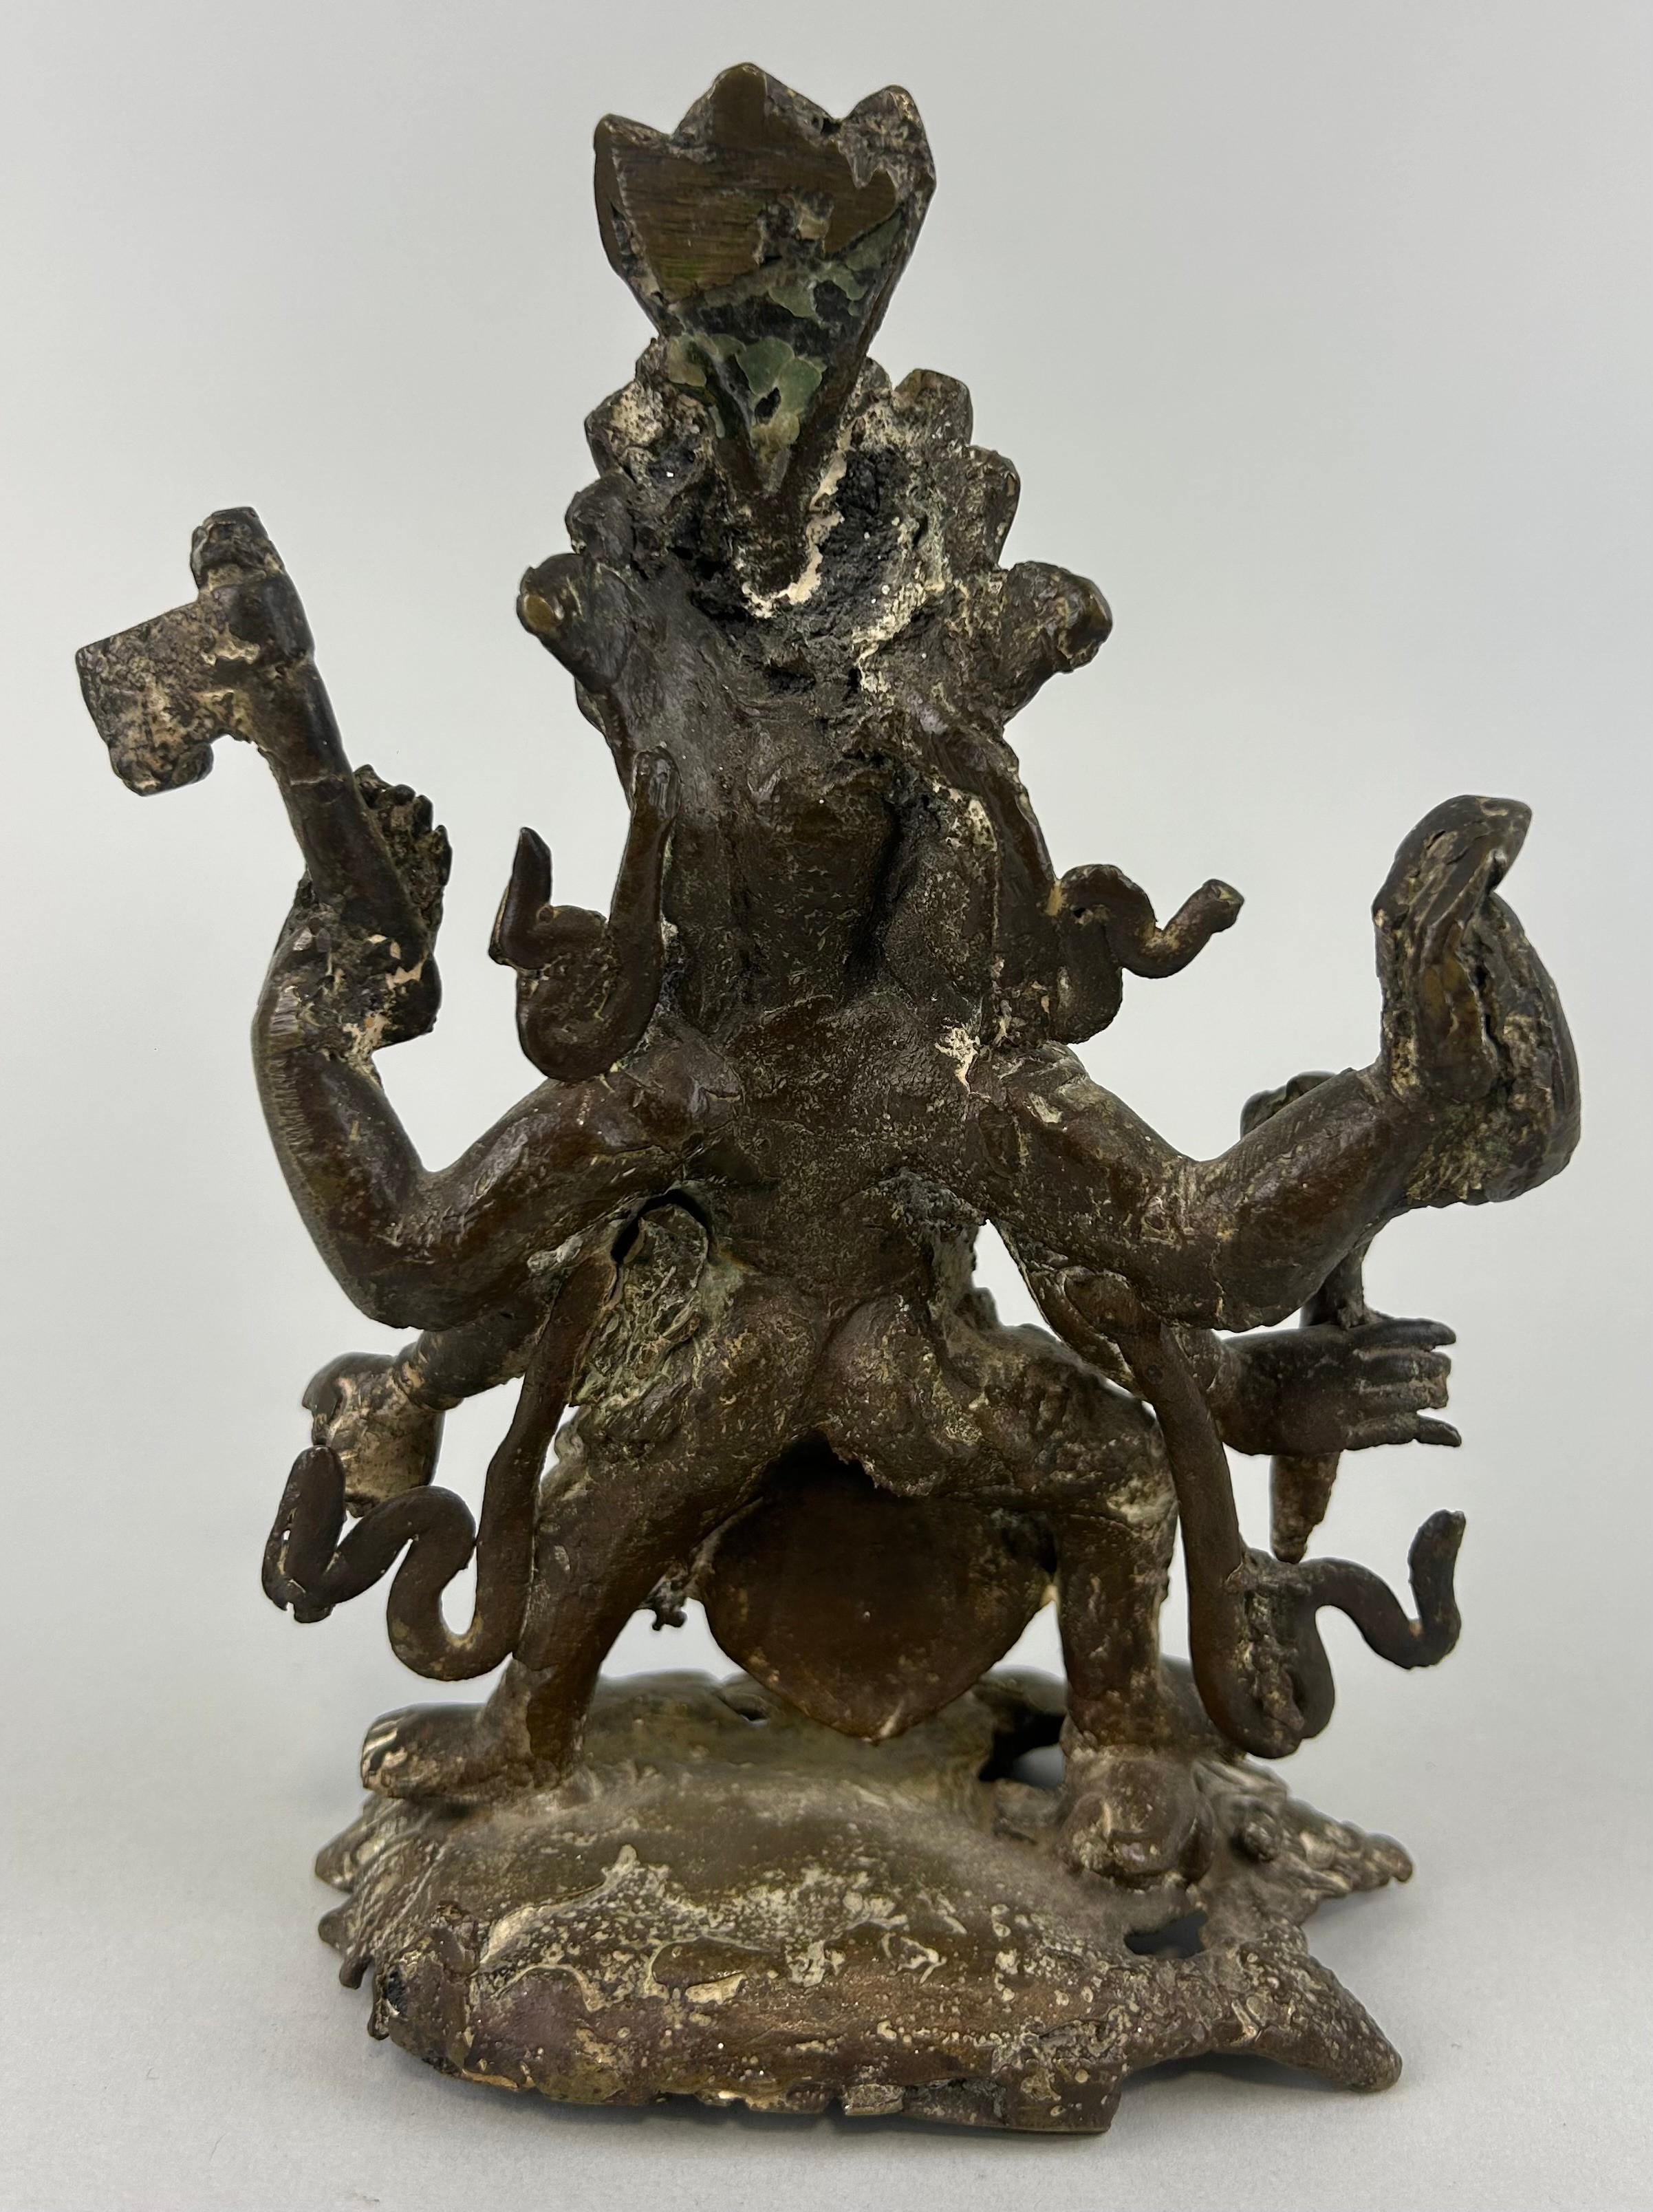 AN INDIAN BRONZE FIGURE OF GANESH PROBABLY 17TH OR 18TH CENTURY, 18cm x 11cm - Image 2 of 3